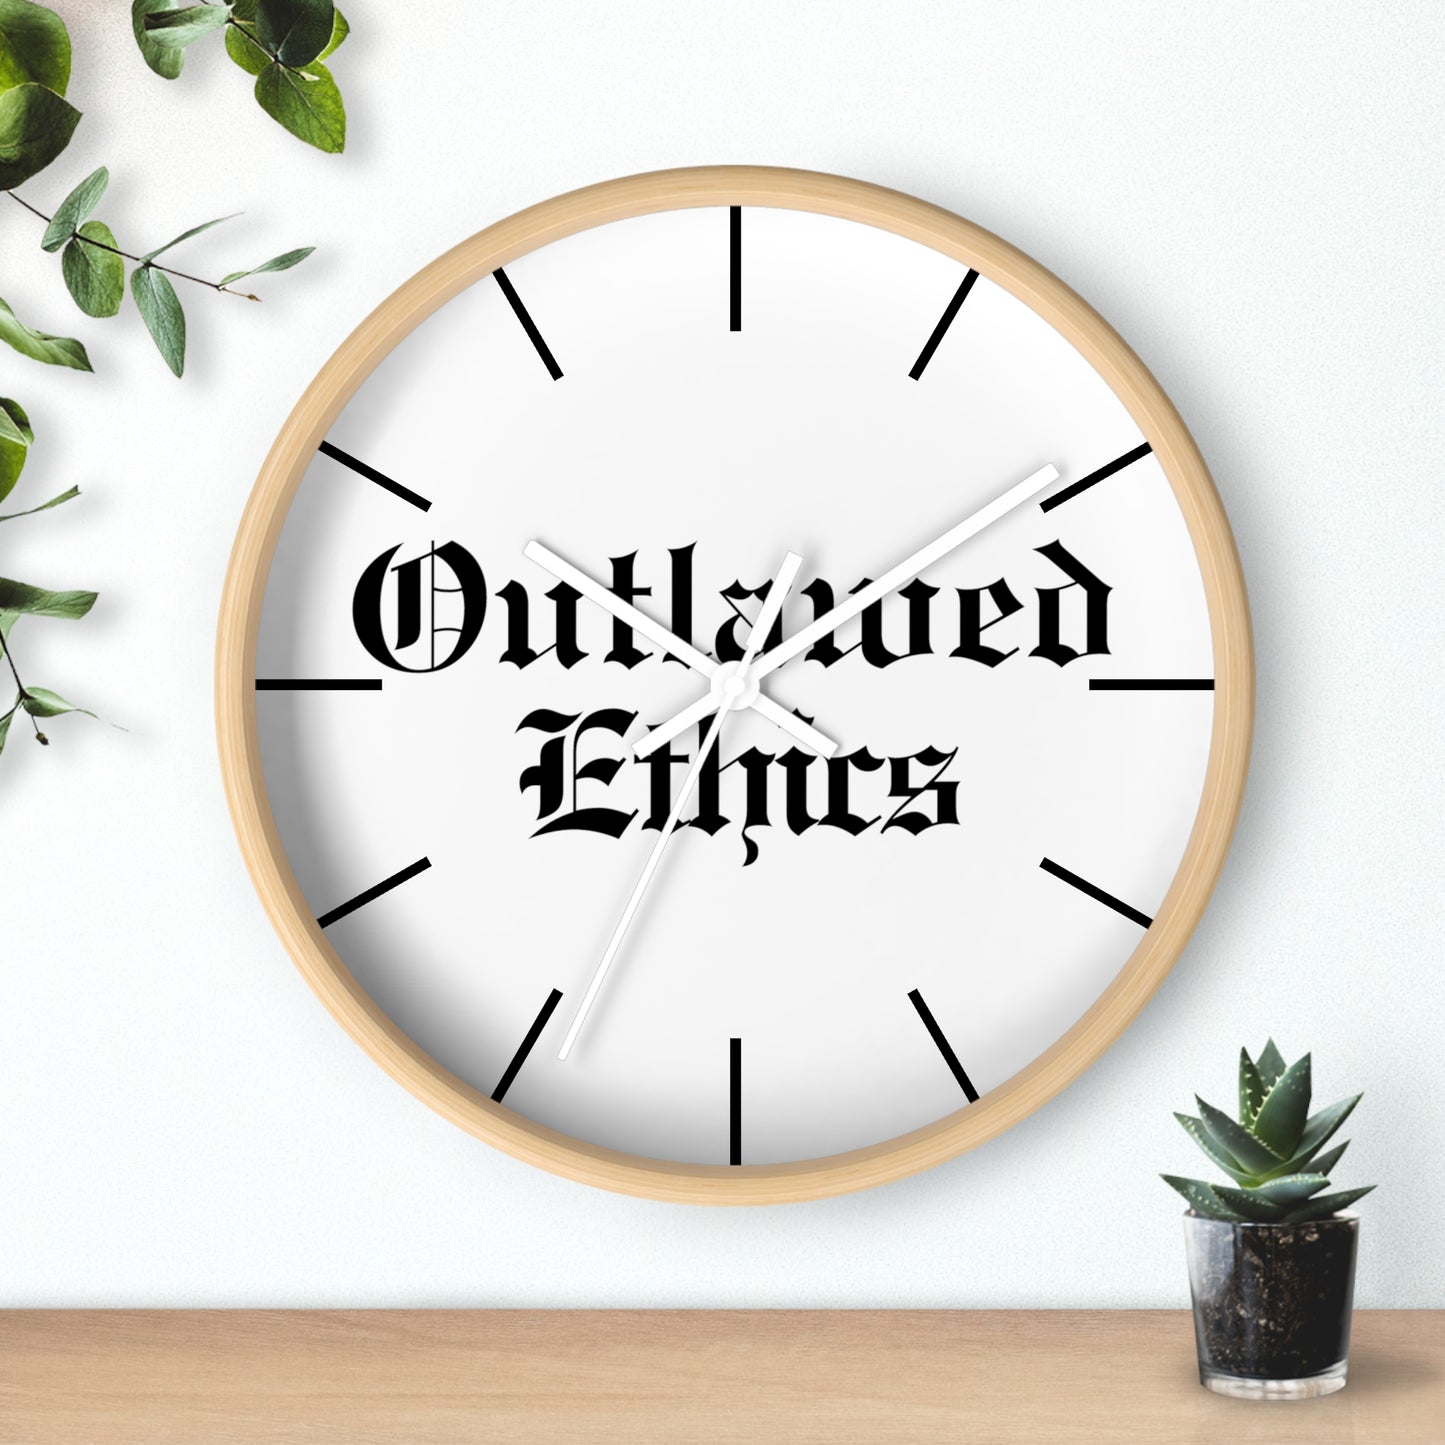 Outlawed Ethics Wall Clock